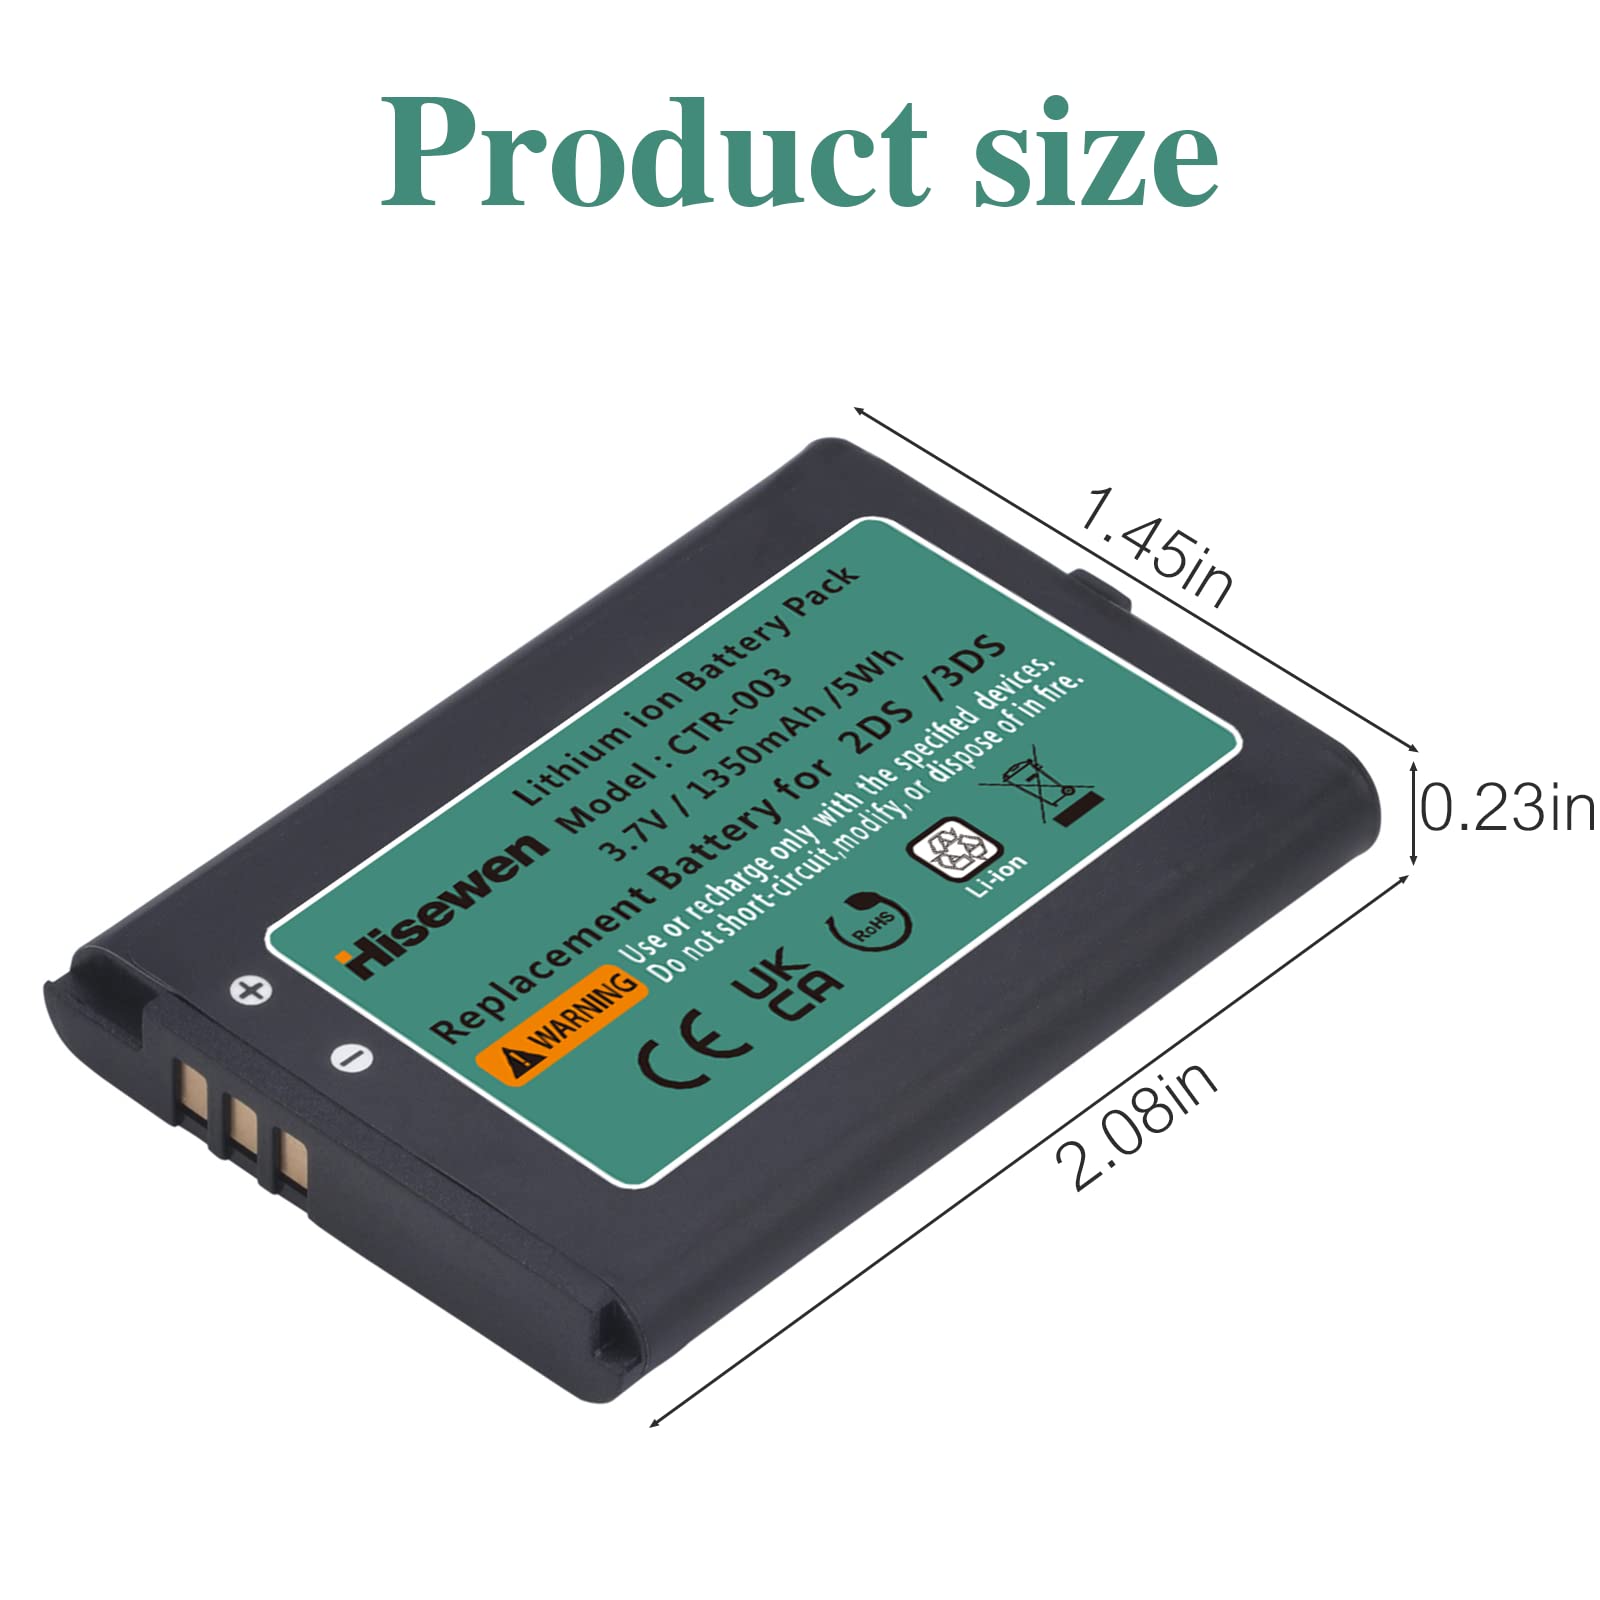 Hisewen 3DS Battery,1350mAh CTR-003 CTR003 Battery for Nintendo 2015 Old 3DS 2DS XL 2DS Game Console